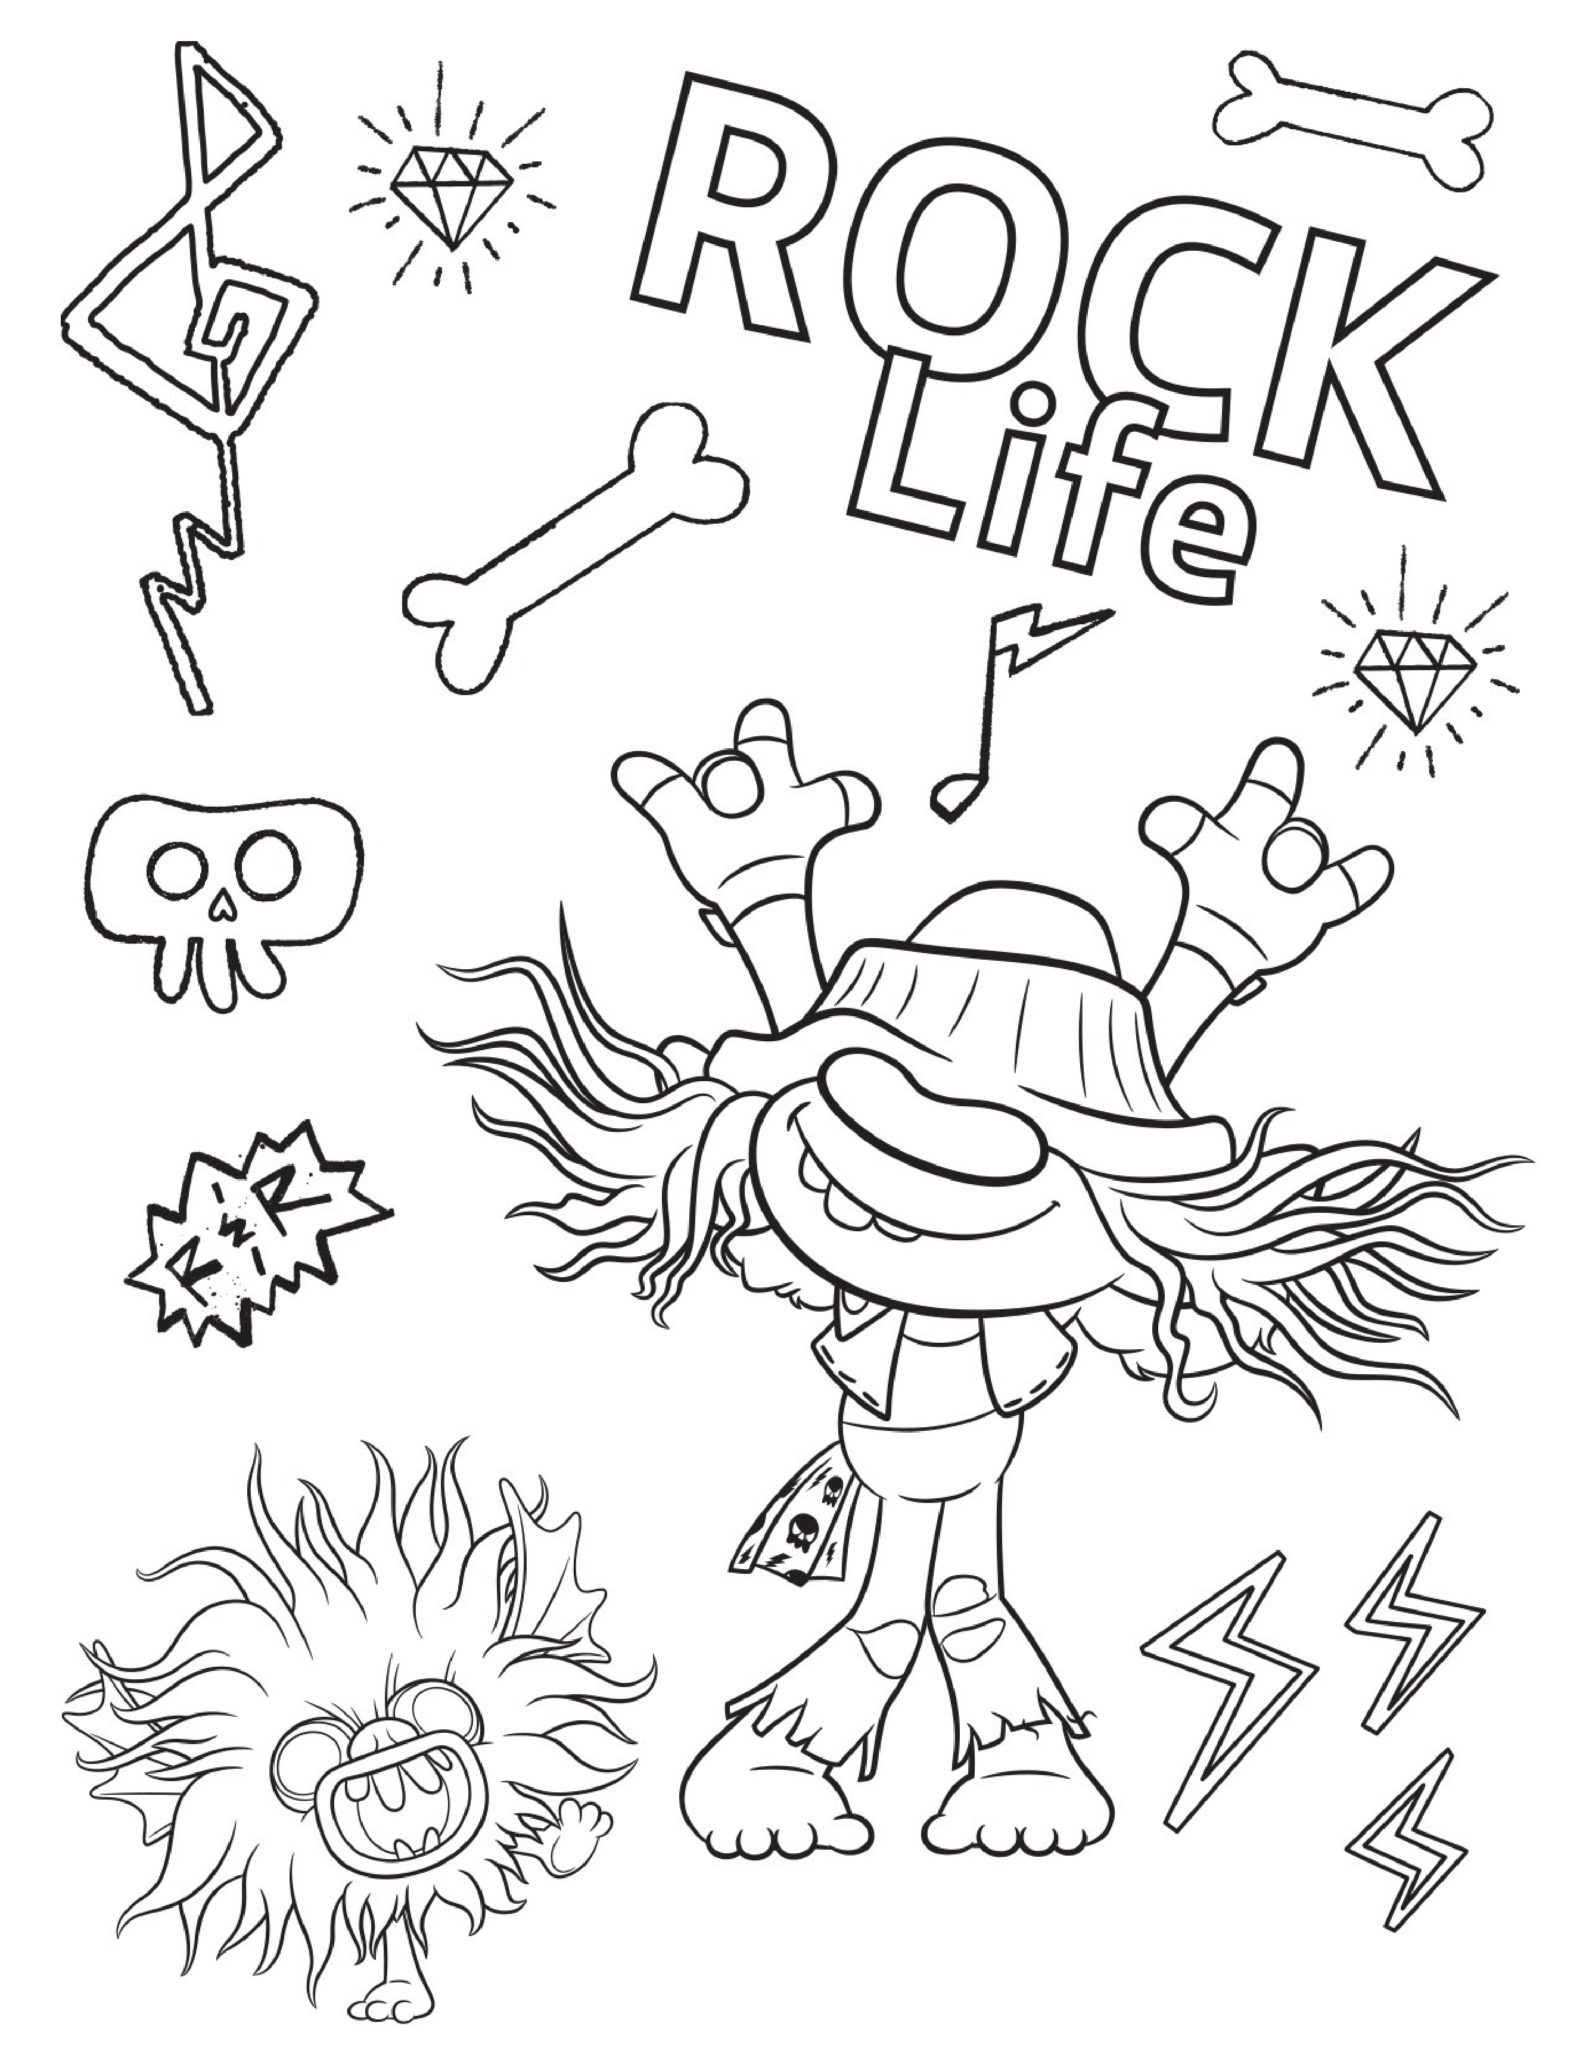 Rock Life Trolls Coloring Page